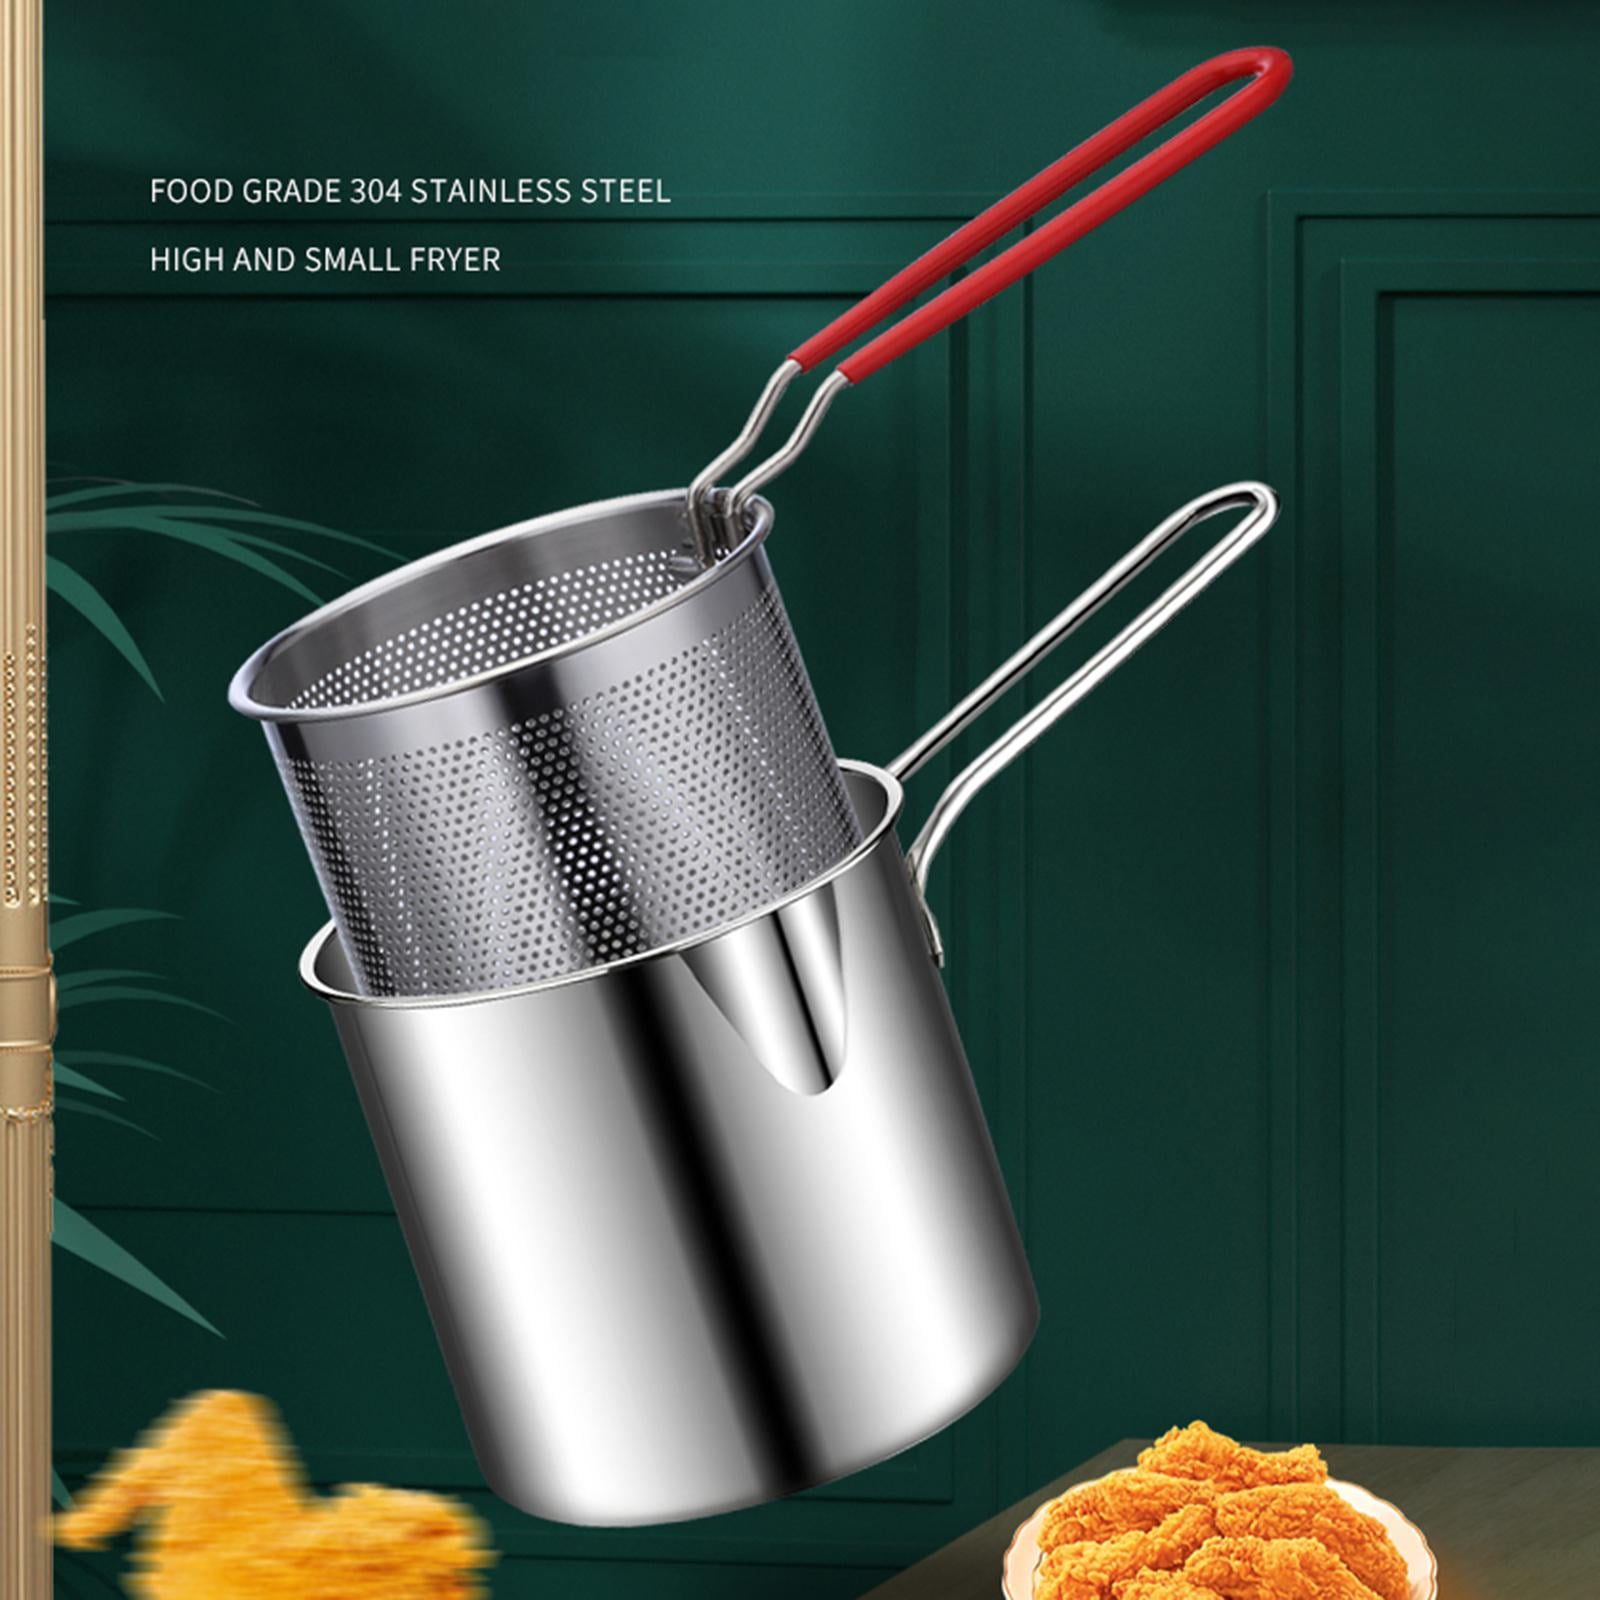 Deep Fryer Pot - Stainless Steel Fry Pot Features Heavy Welded Handle  Stainless Perforated Basket - Dishwasher Safe Fryer for Tempura, Fried  Chicken